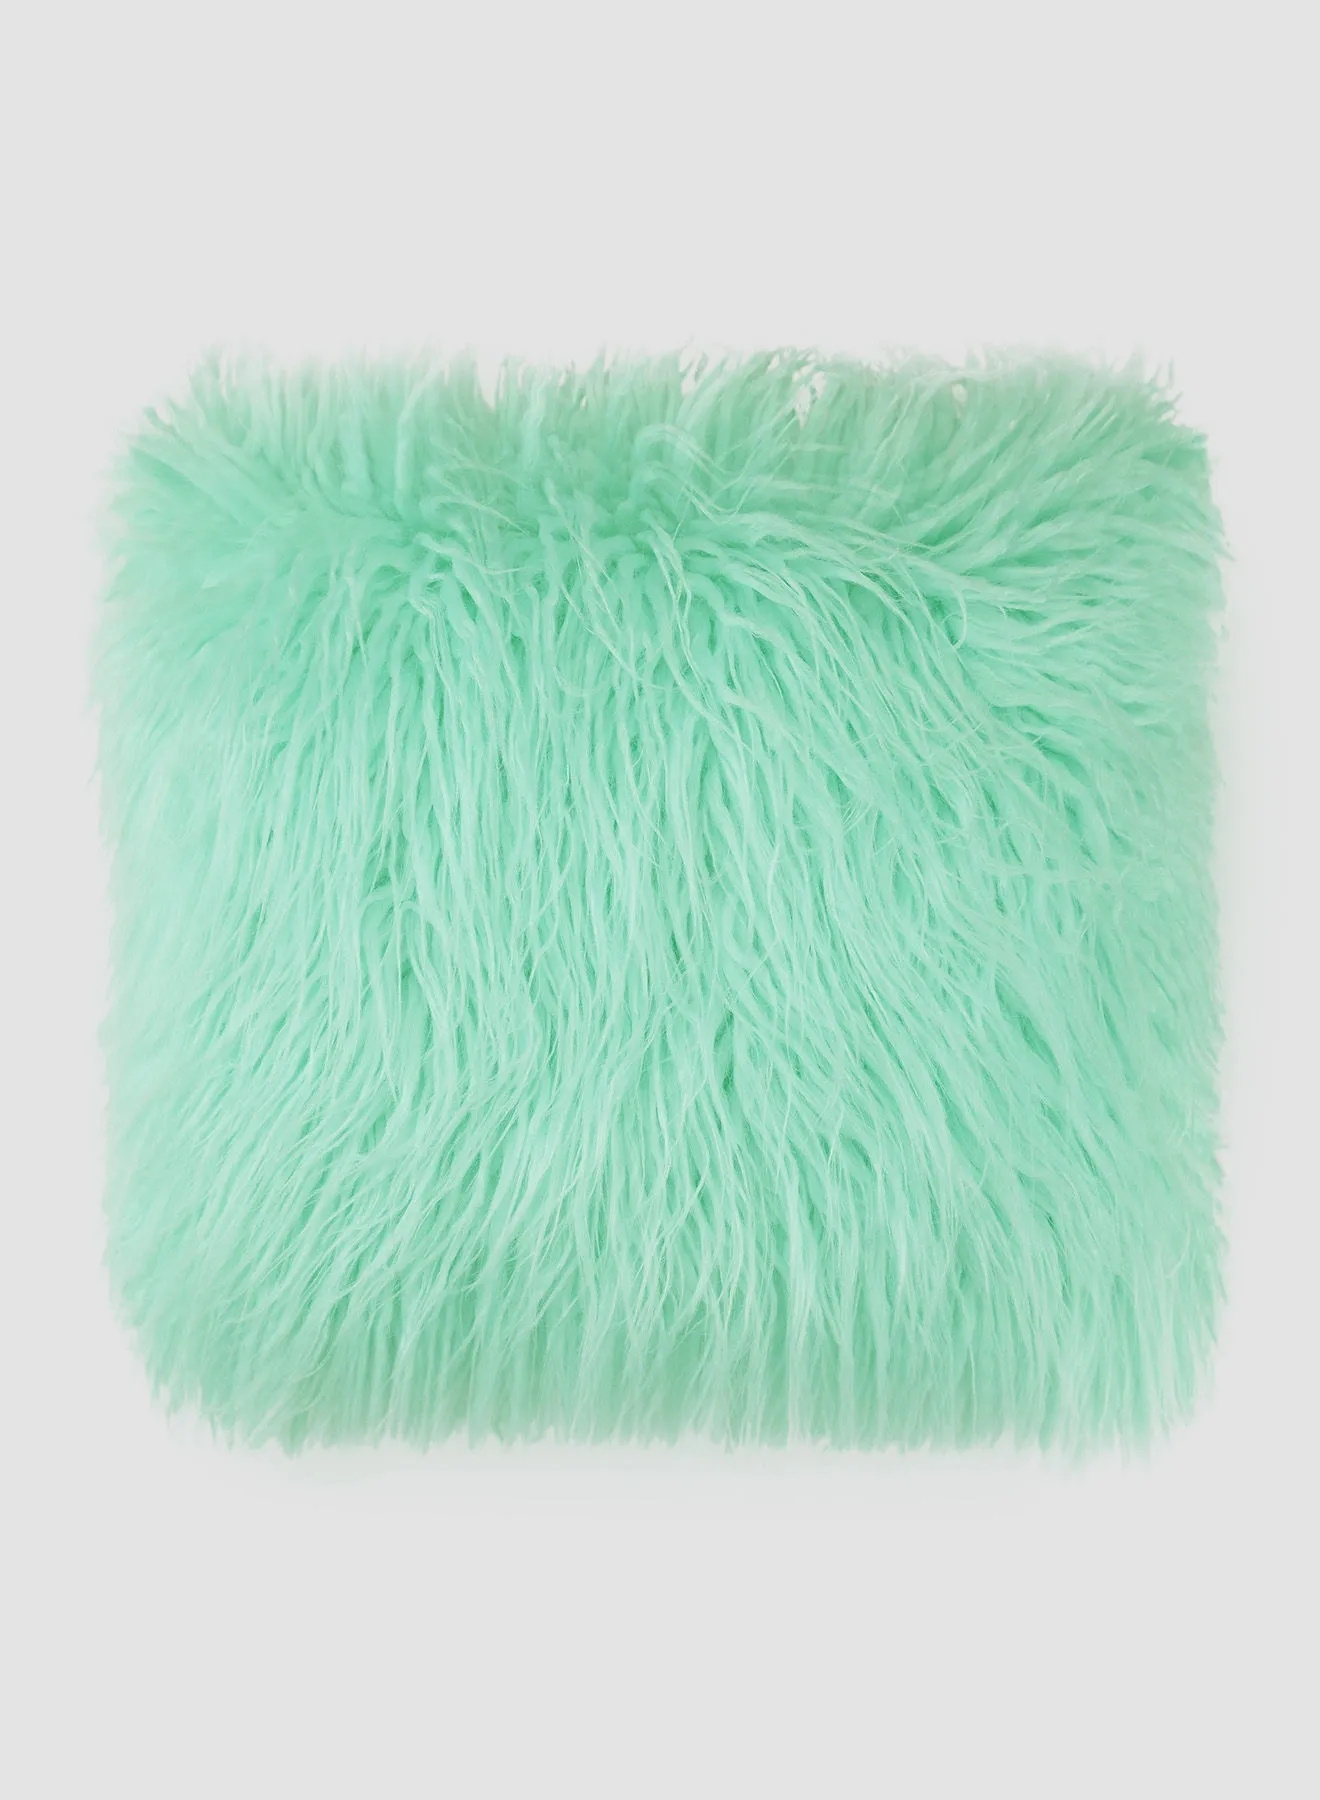 ebb & flow Faux Fur Cushion, Unique Luxury Quality Decor Items for the Perfect Stylish Home Green 50 x 50cm